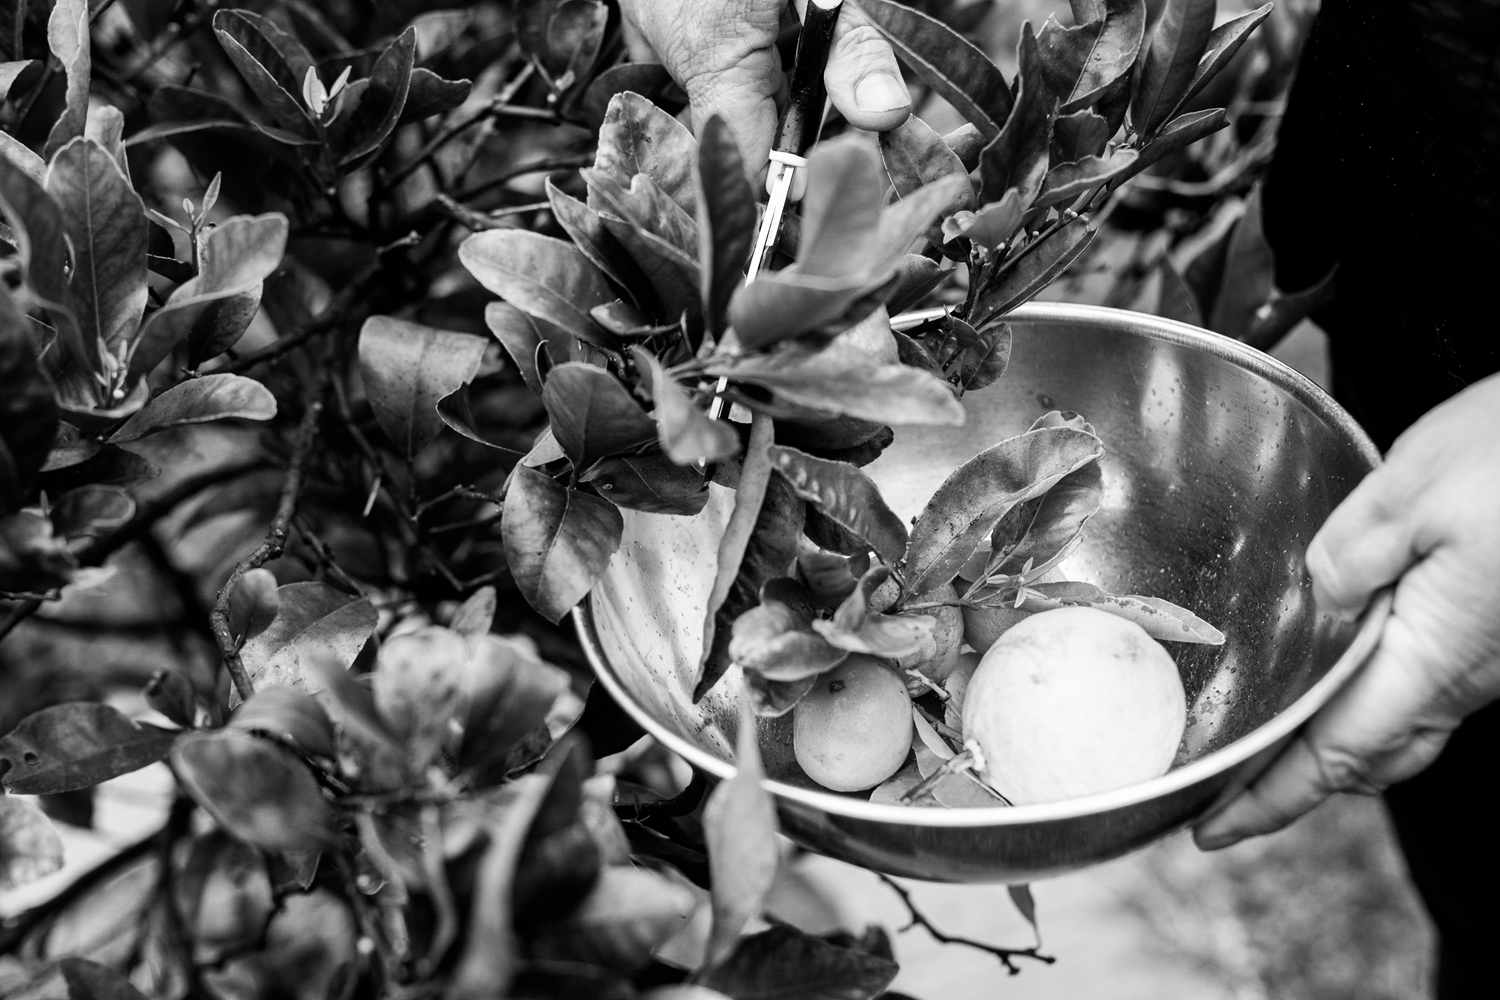 Black and white photograph of close up image of two hands cutting a lemon tree.  One hand holds a bowl with a lemon placed in it. 